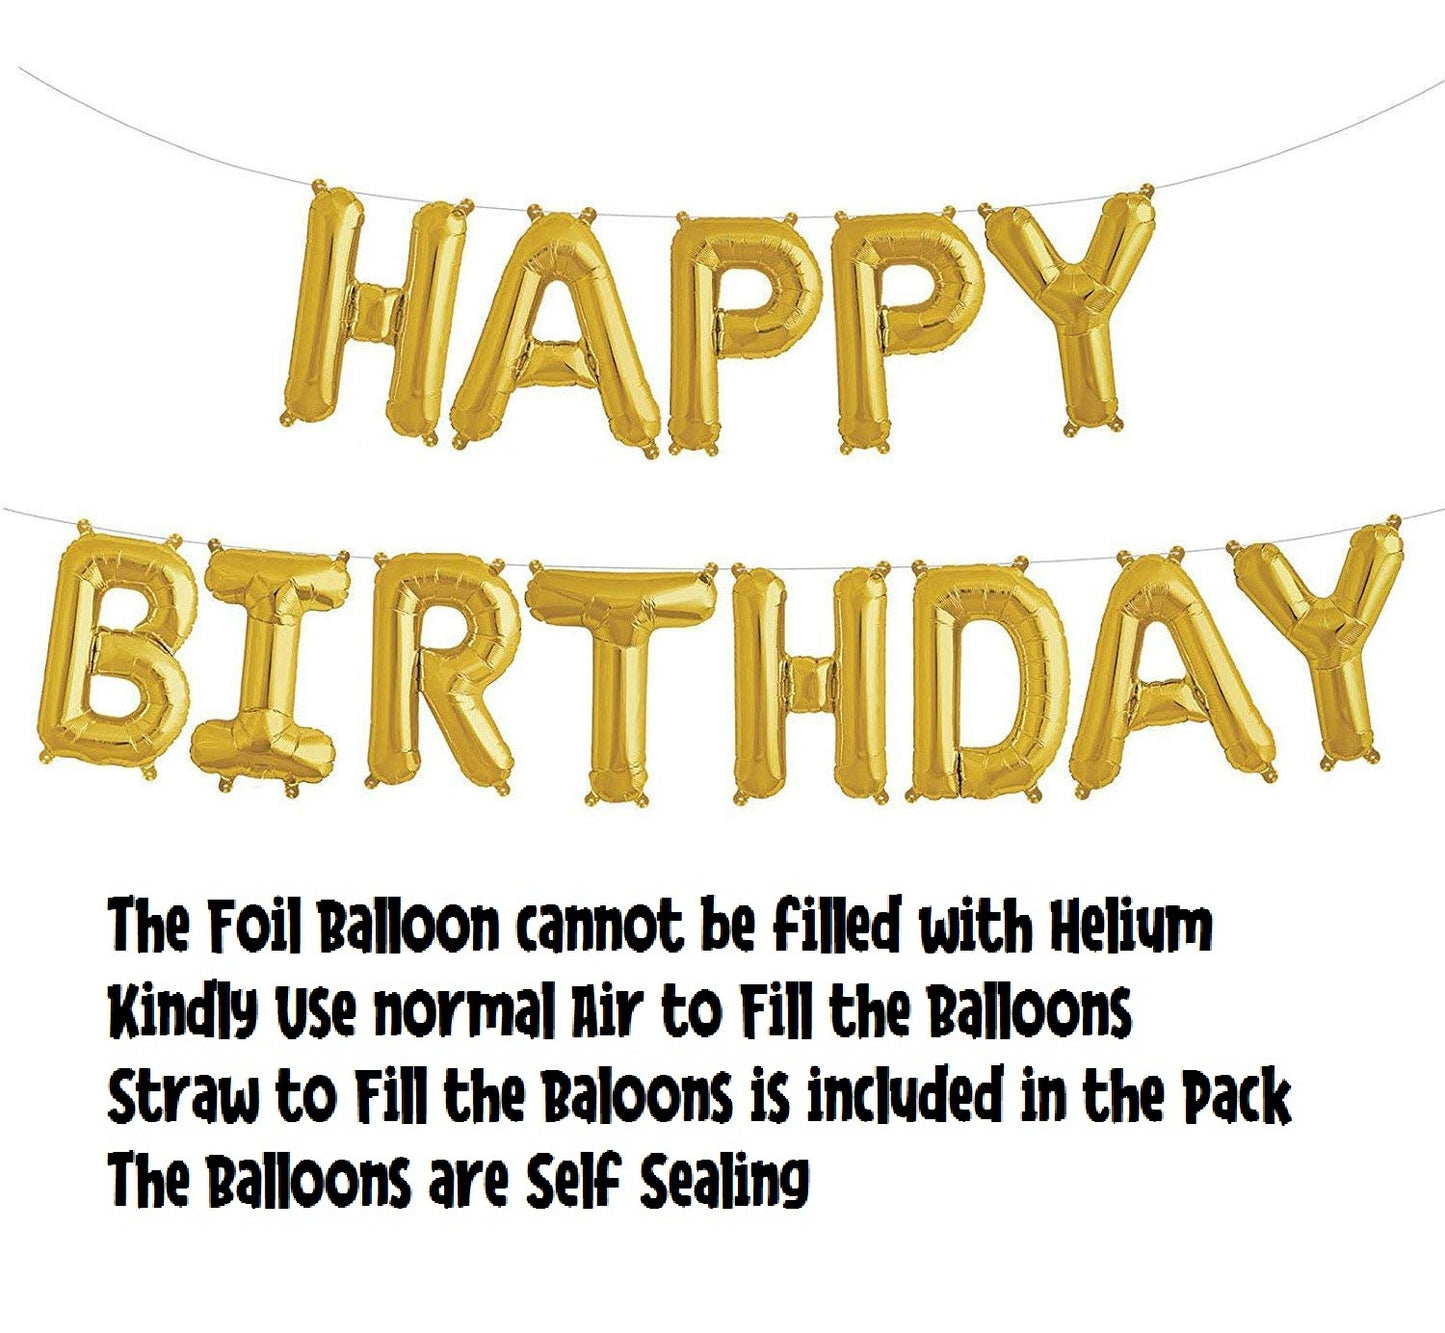 Happy 47th Birthday Foil Balloon Combo Party Decoration for Anniversary Celebration 16 Inches